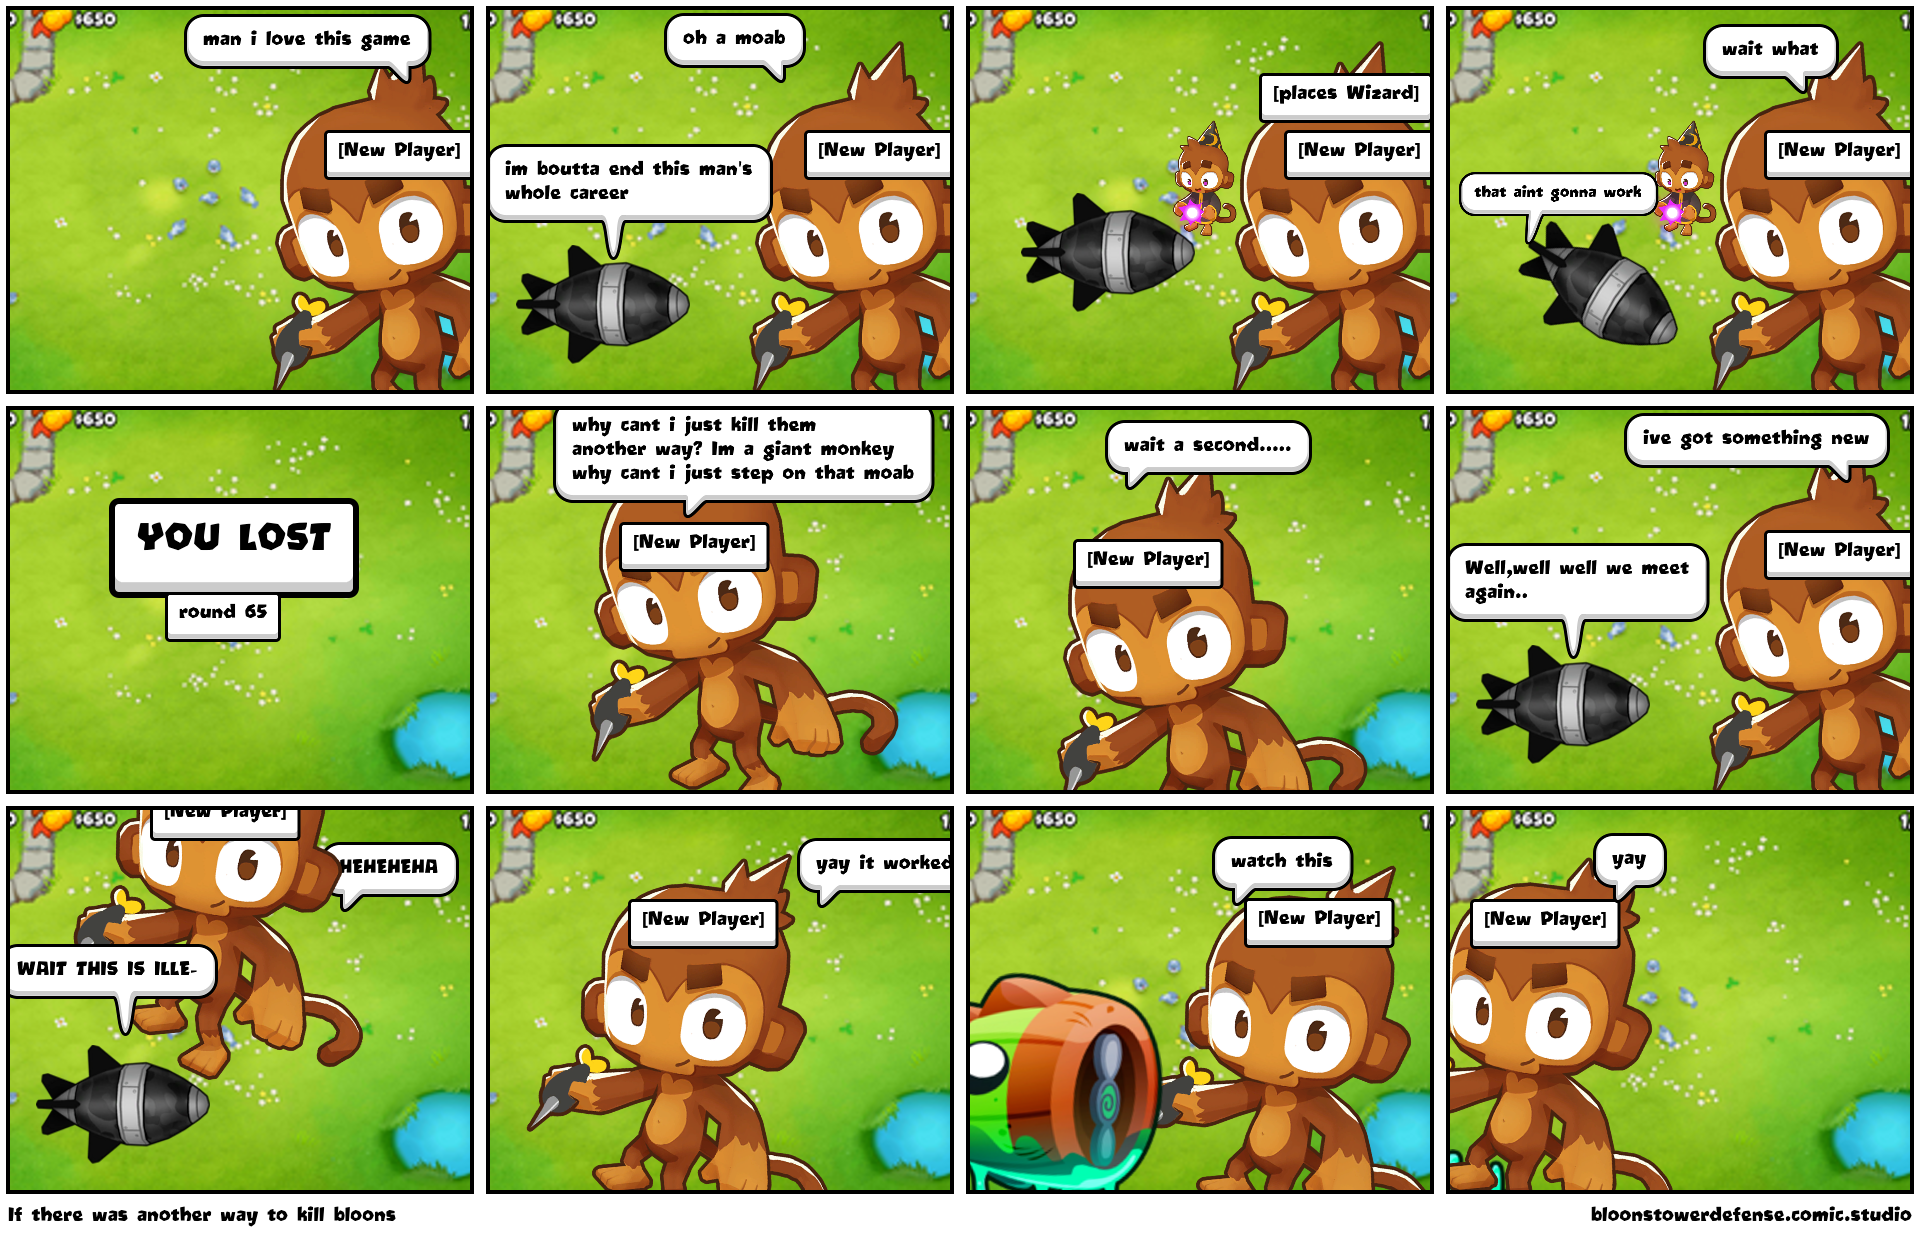 If there was another way to kill bloons